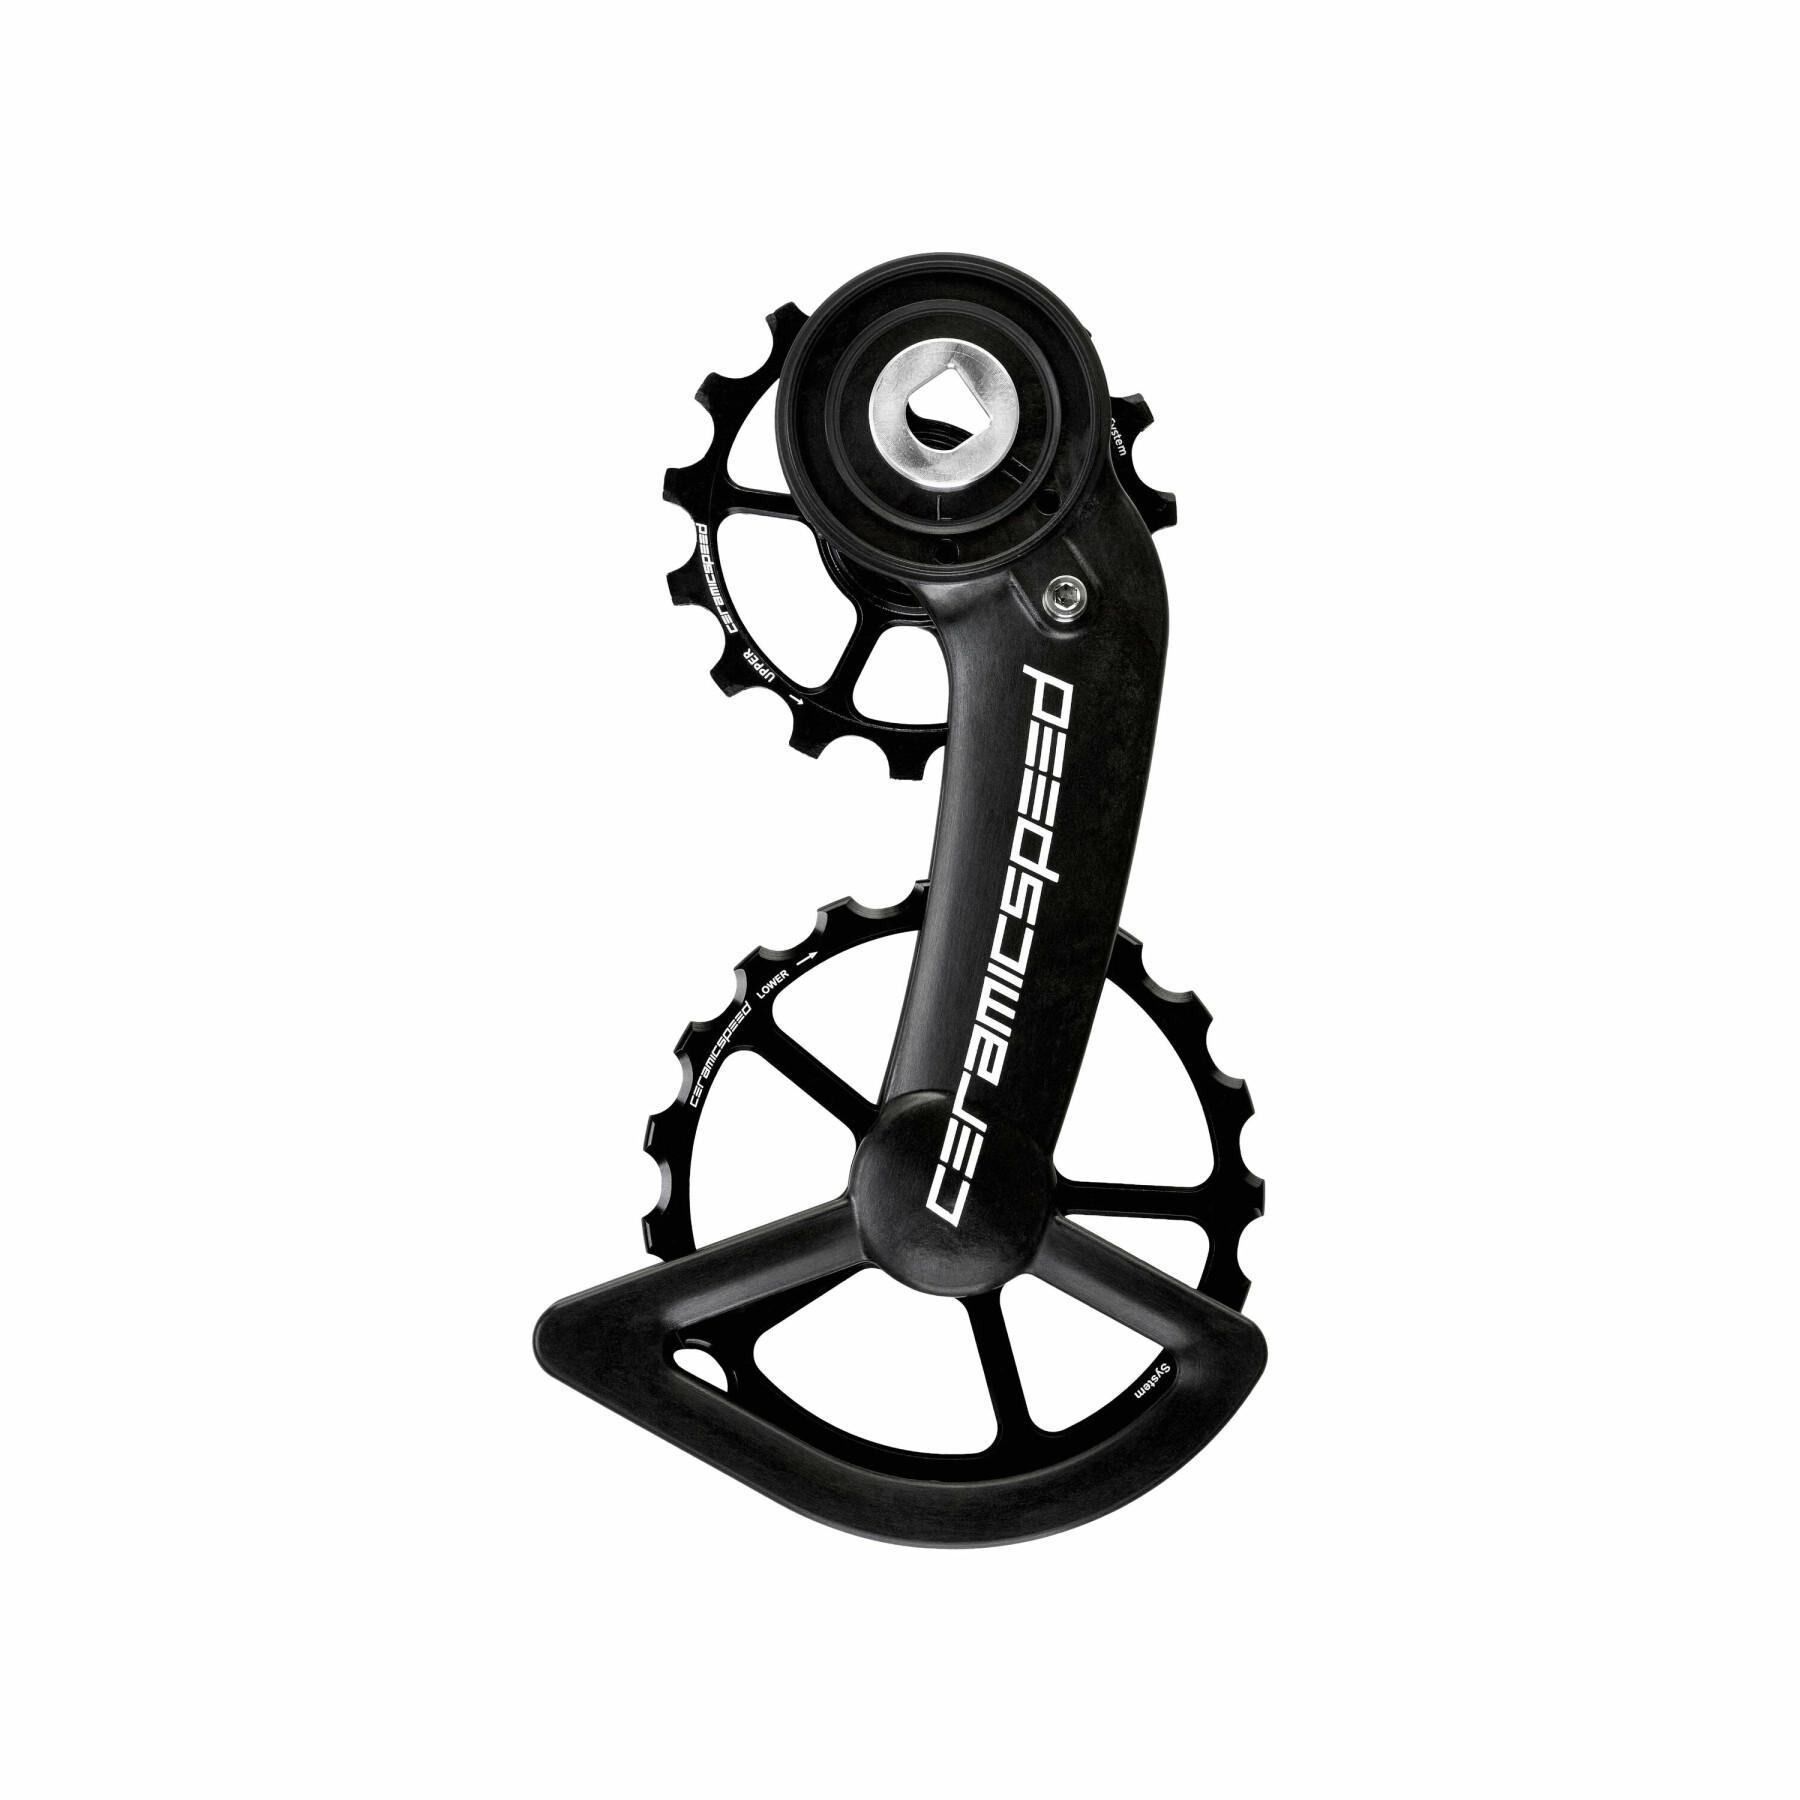 Screed CeramicSpeed OSPW Sram red/force axs 12V